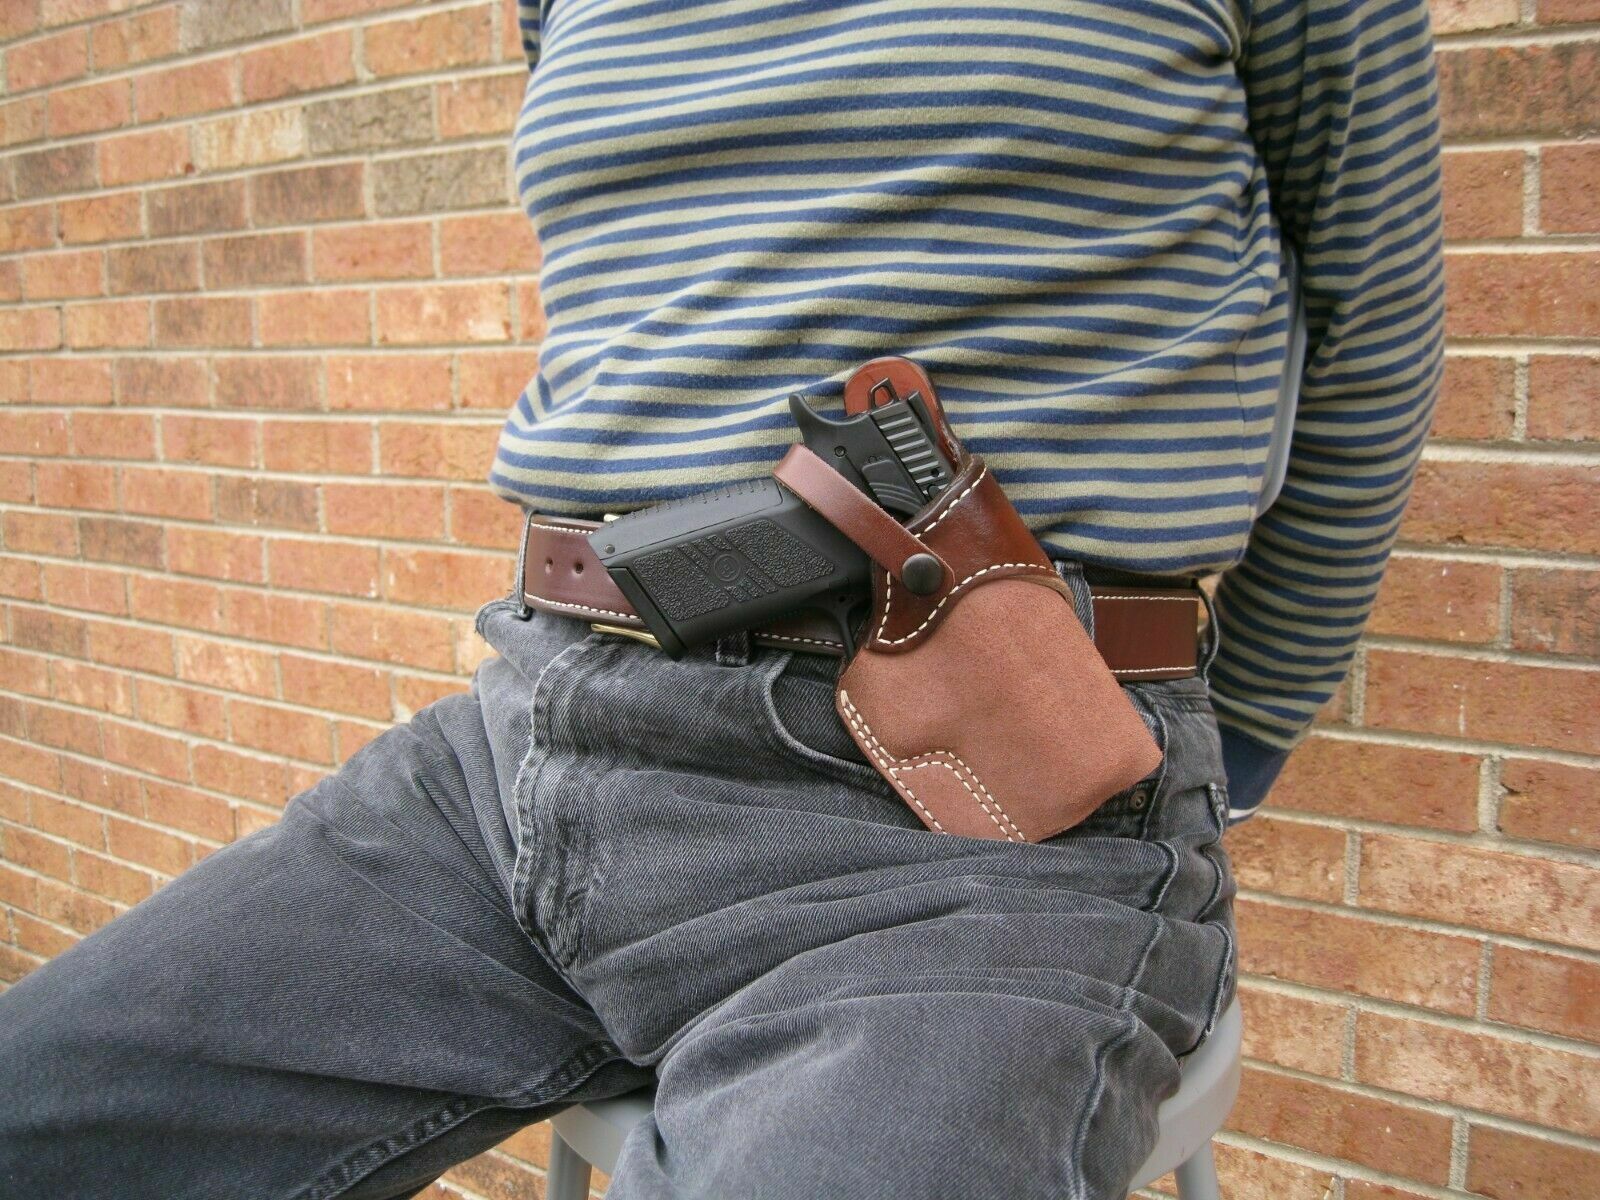 What Are The Merits Of Buying Custom leather Holsters For Your Firearm?